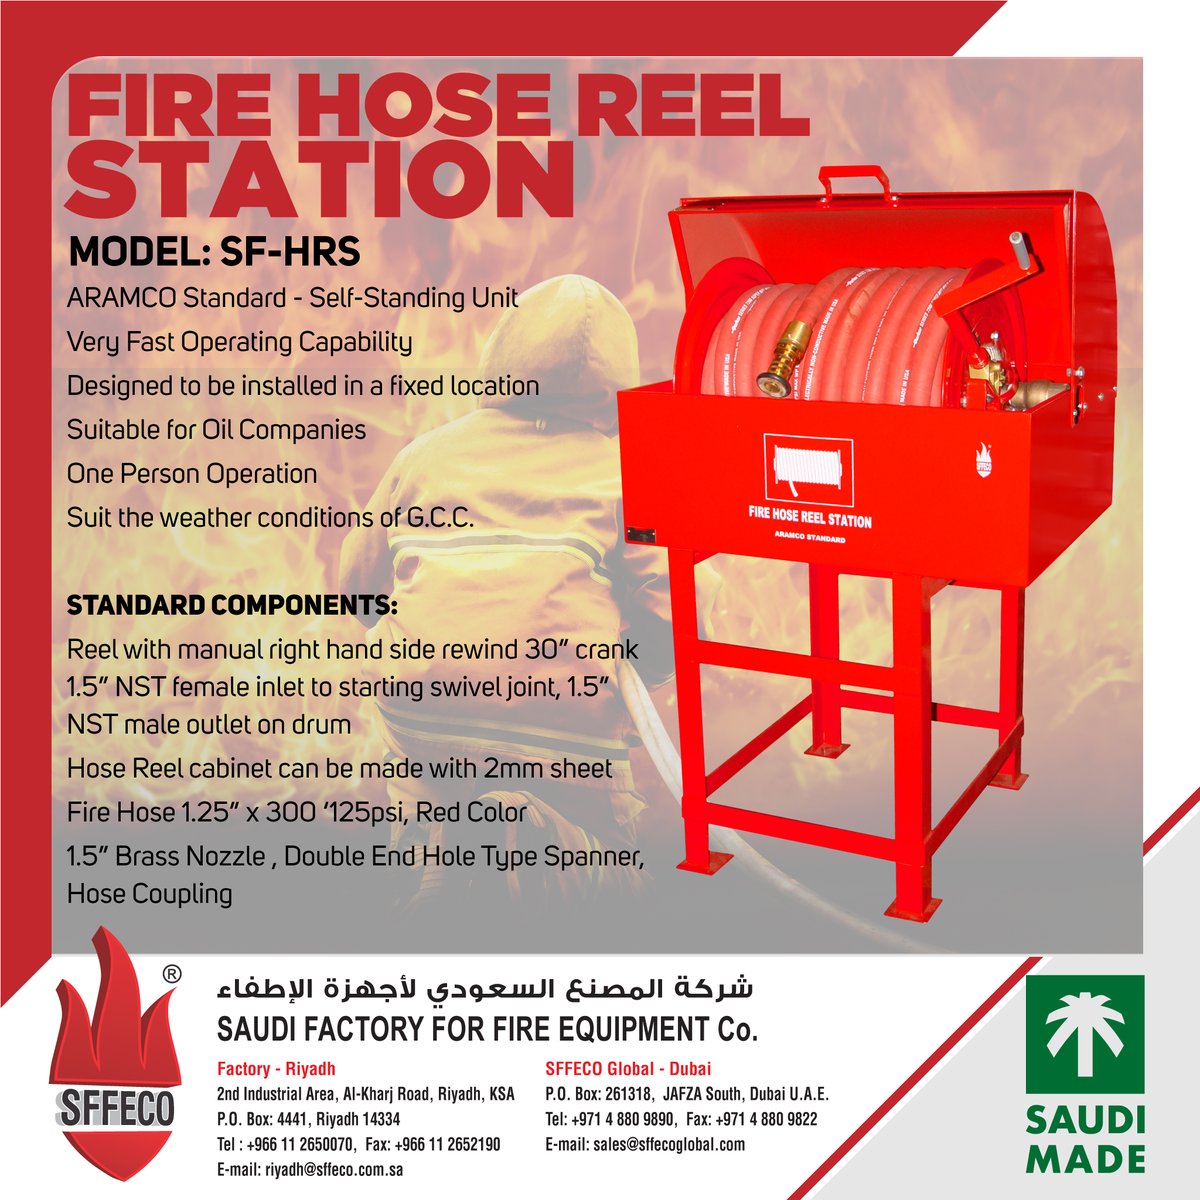 The SFFECO Fire Hose Reel Station Unit is a self-standing unit and it is designed to meet the requirement of oil companies having a dependable, forceful and very fast operating apparatus in firefighting.  
#Hose_reel #swivel #oilandgasindustry #firecabinet https://t.co/sT5HMgQSmx